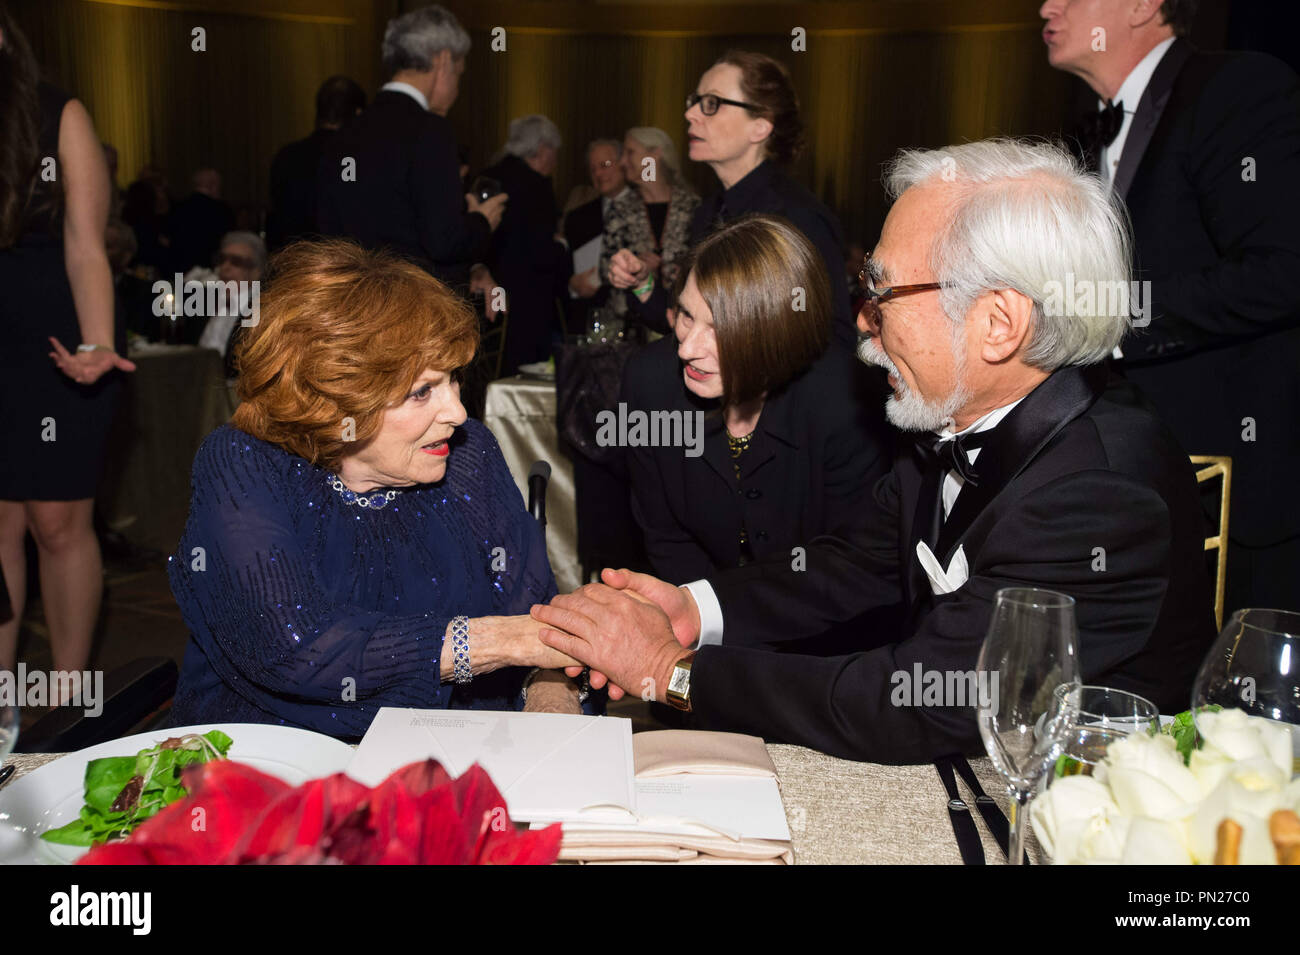 Honorary Award recipients Maureen O’Hara (left) and Hayao Miyazaki attend the 6th Annual Governors Awards in The Ray Dolby Ballroom at Hollywood & Highland Center® in Hollywood, CA, on Saturday, November 8, 2014.  File Reference # 32487 163THA  For Editorial Use Only -  All Rights Reserved Stock Photo